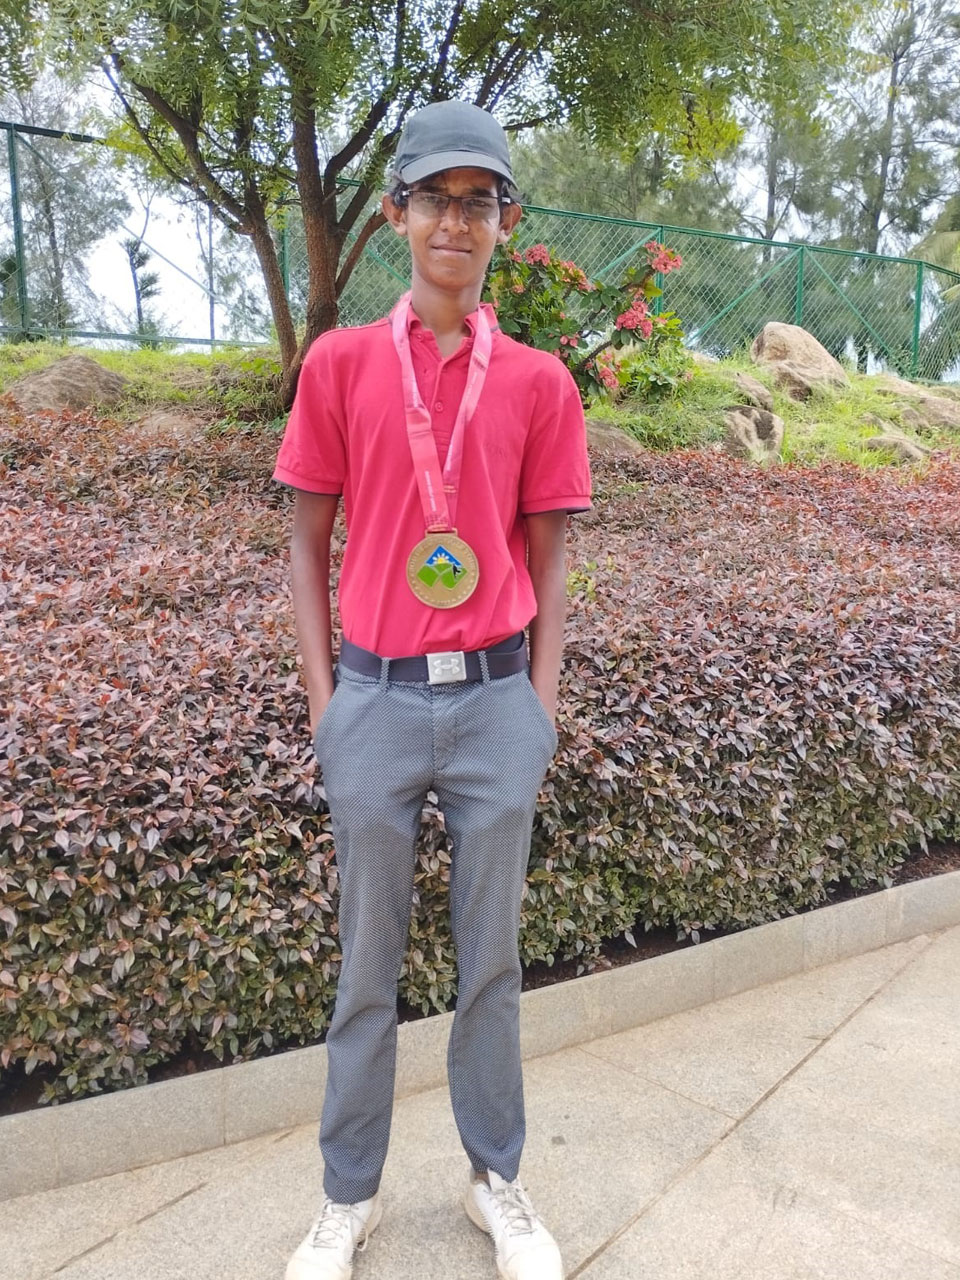 Sumith Chandra finished 3rd at Clover Greens South Zone Amateur Golf Championship